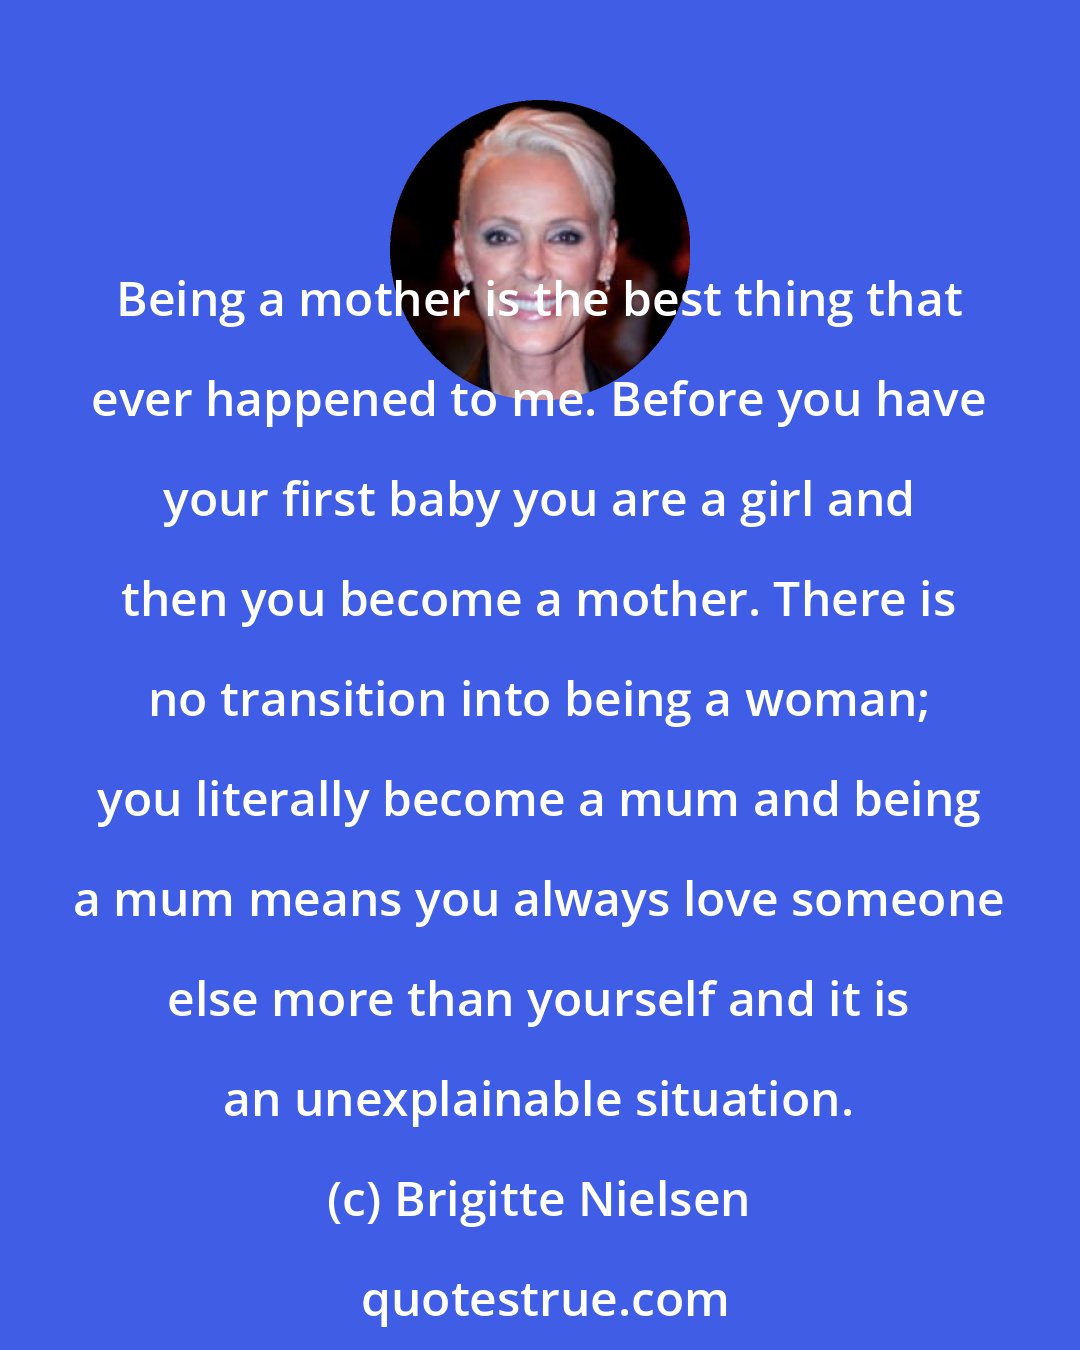 Brigitte Nielsen: Being a mother is the best thing that ever happened to me. Before you have your first baby you are a girl and then you become a mother. There is no transition into being a woman; you literally become a mum and being a mum means you always love someone else more than yourself and it is an unexplainable situation.